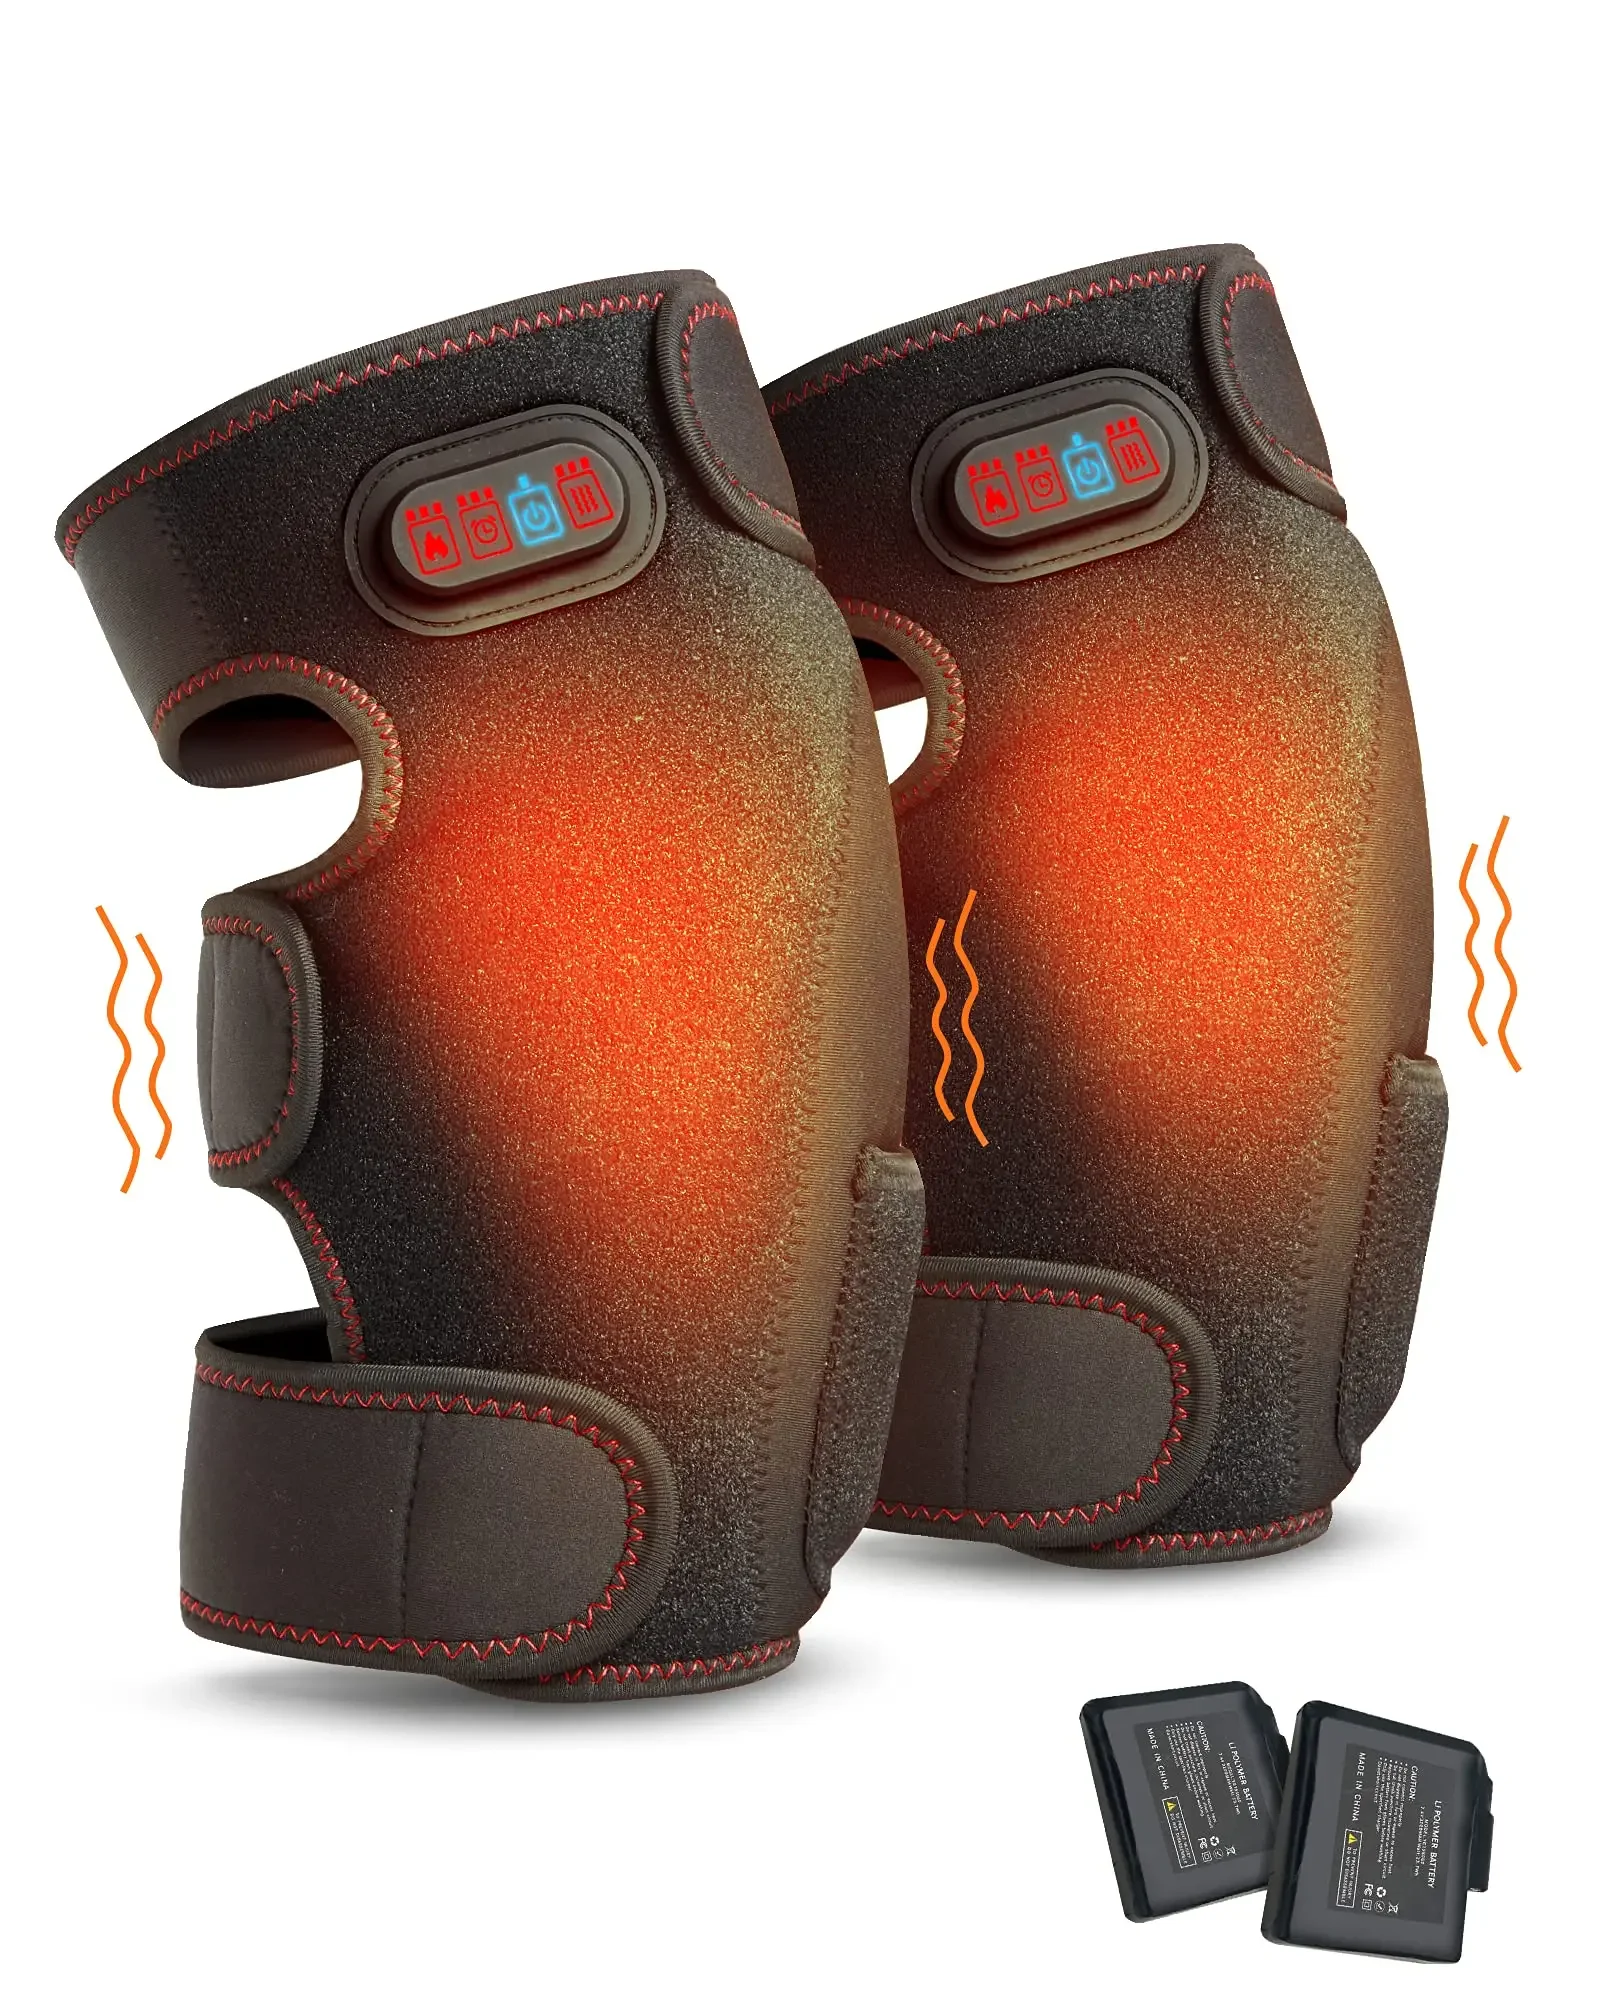 Heated Knee Brace Wrap - Battery Powered Knee Heating Pad Vibration Massager for Knee Pain Relief (1 Pair) heated vest for women men smart electric heating vest rechargeable warming heated jacket warmer jacket battery not included